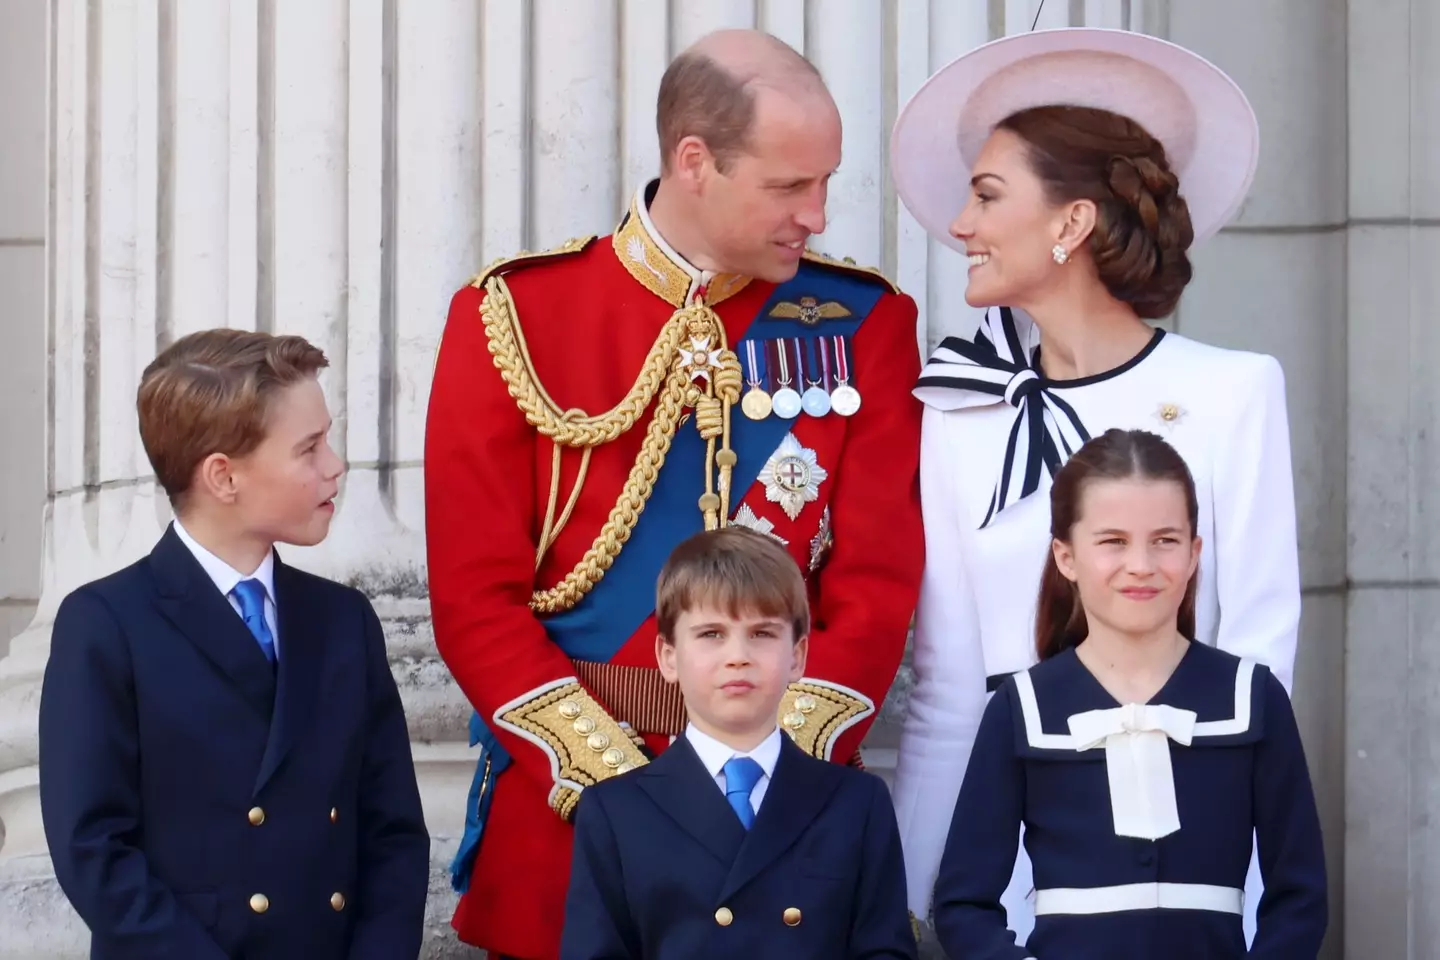 The family during Trooping the Colour at Buckingham Palace on 15 June (Chris Jackson/Getty Image)